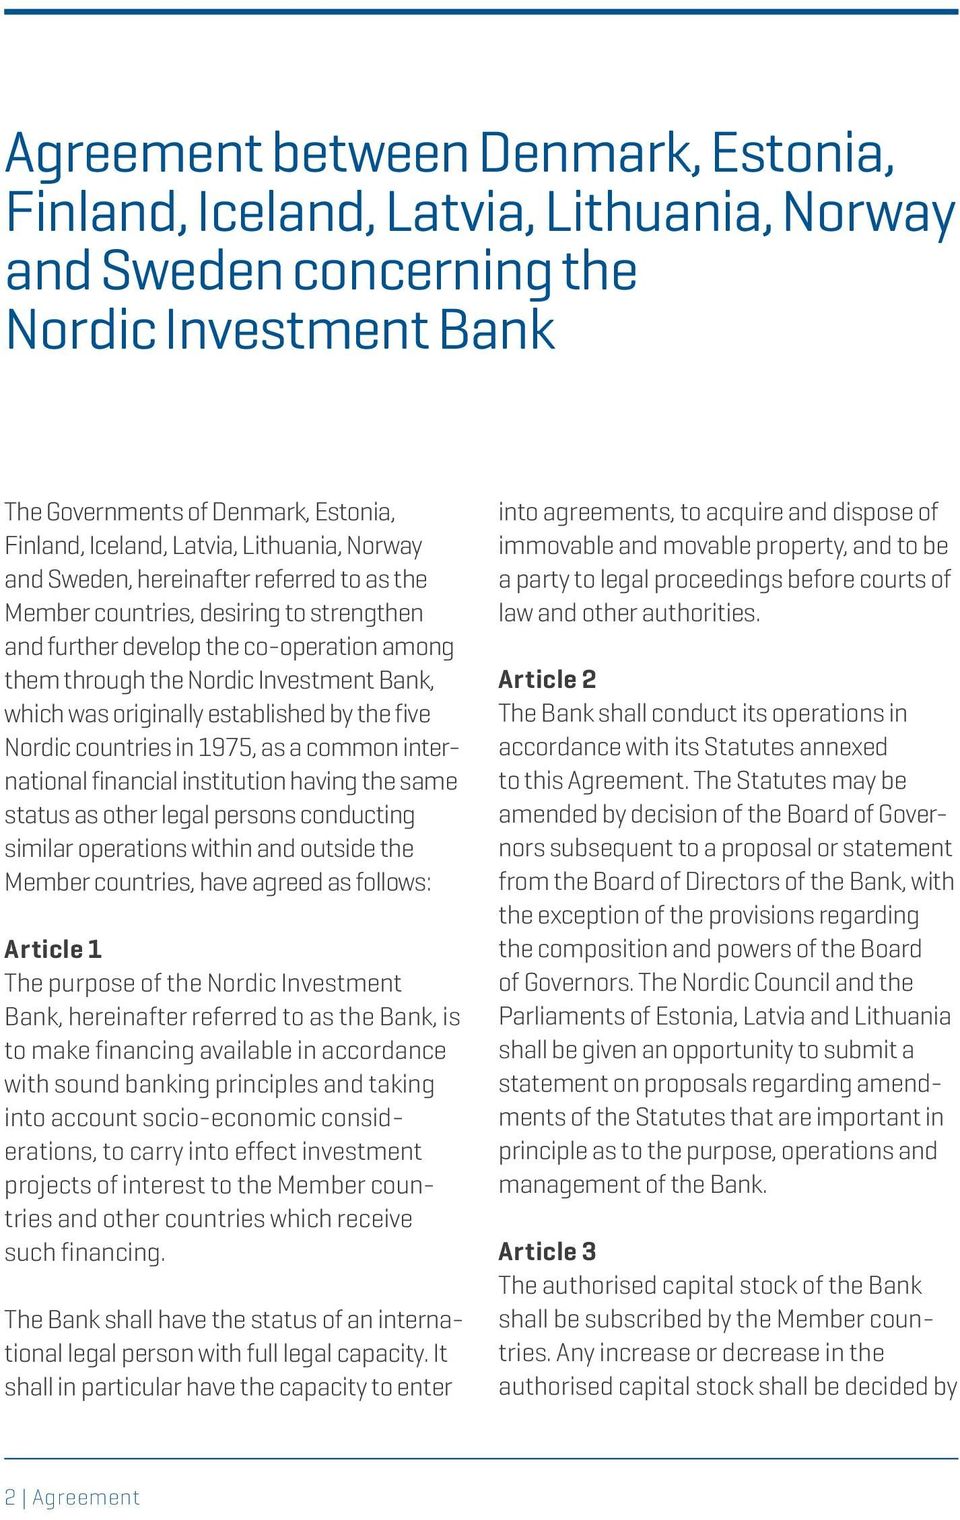 originally established by the five Nordic countries in 1975, as a common international financial institution having the same status as other legal persons conducting similar operations within and